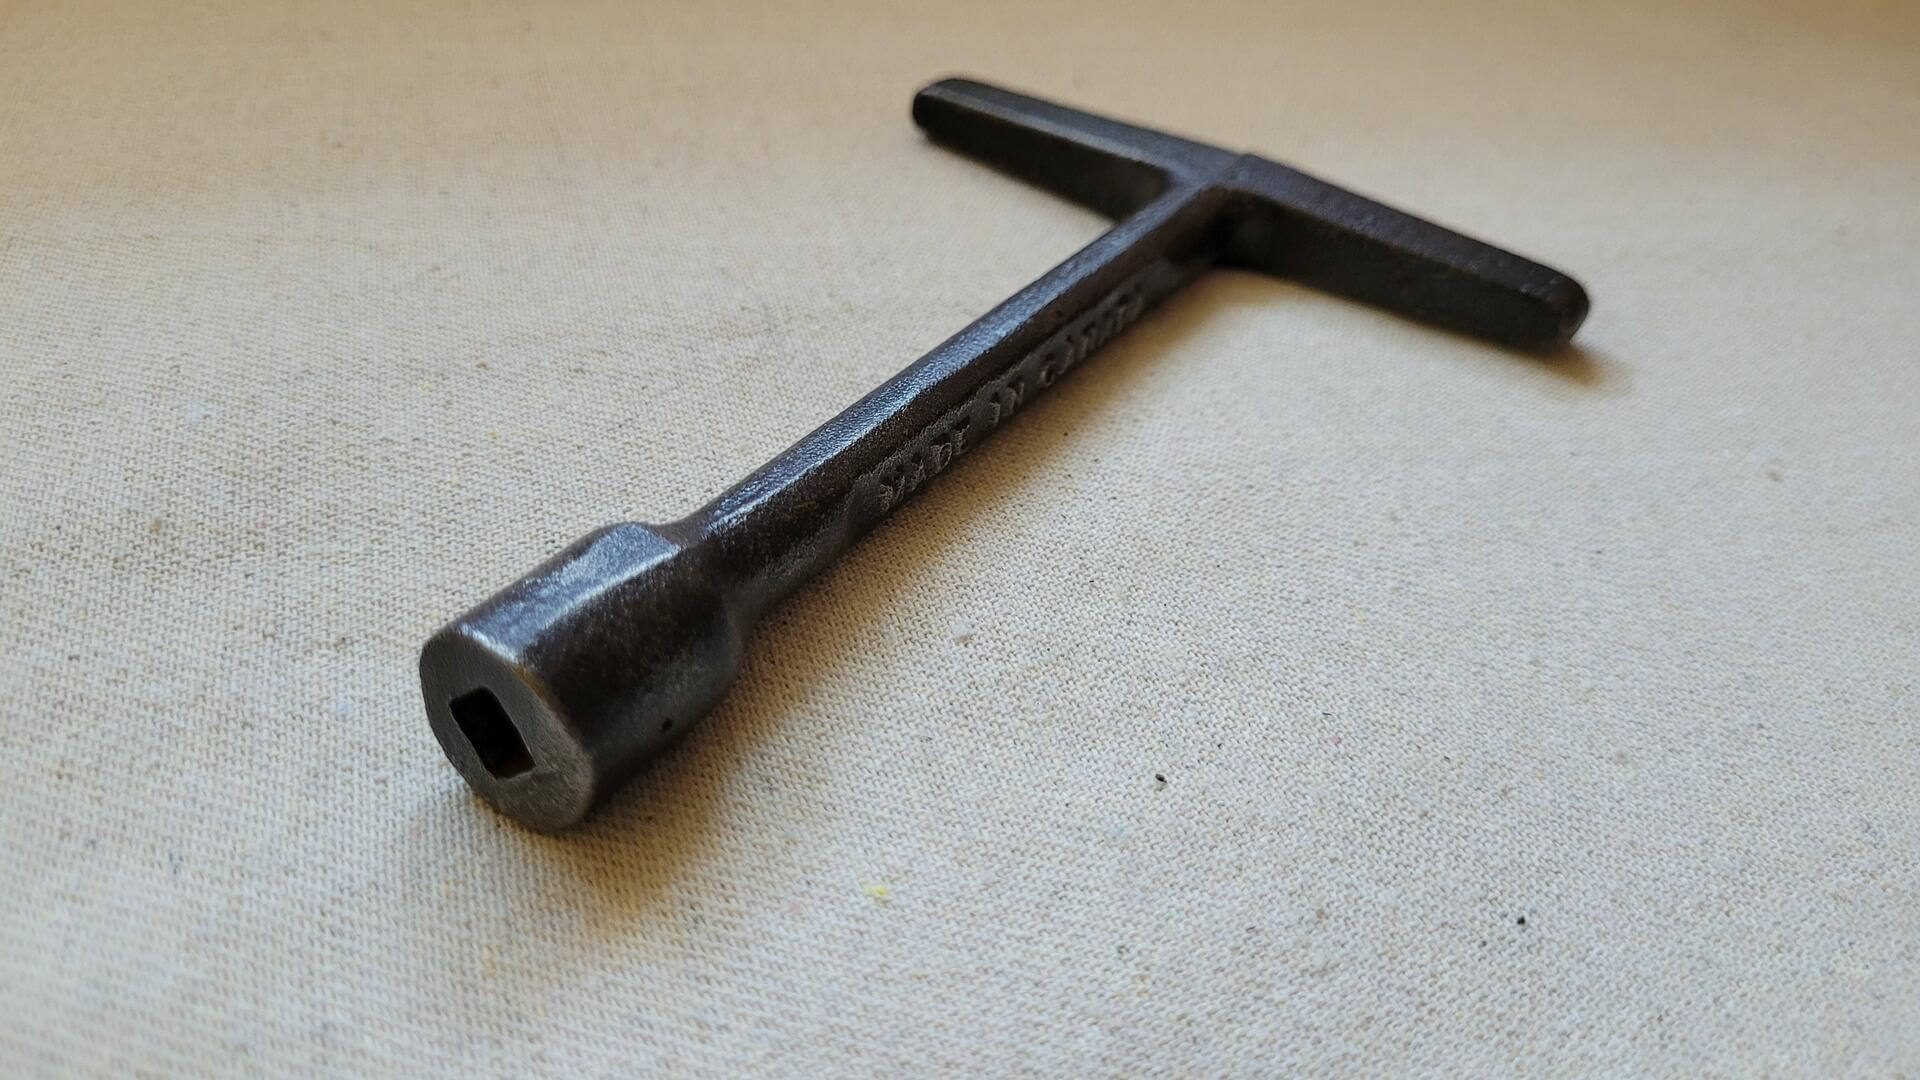 Vintage T Handle Prest-o-Lite Tank Valve Wrench Made in Canada - Antique collectible mechanic and welding hand tools